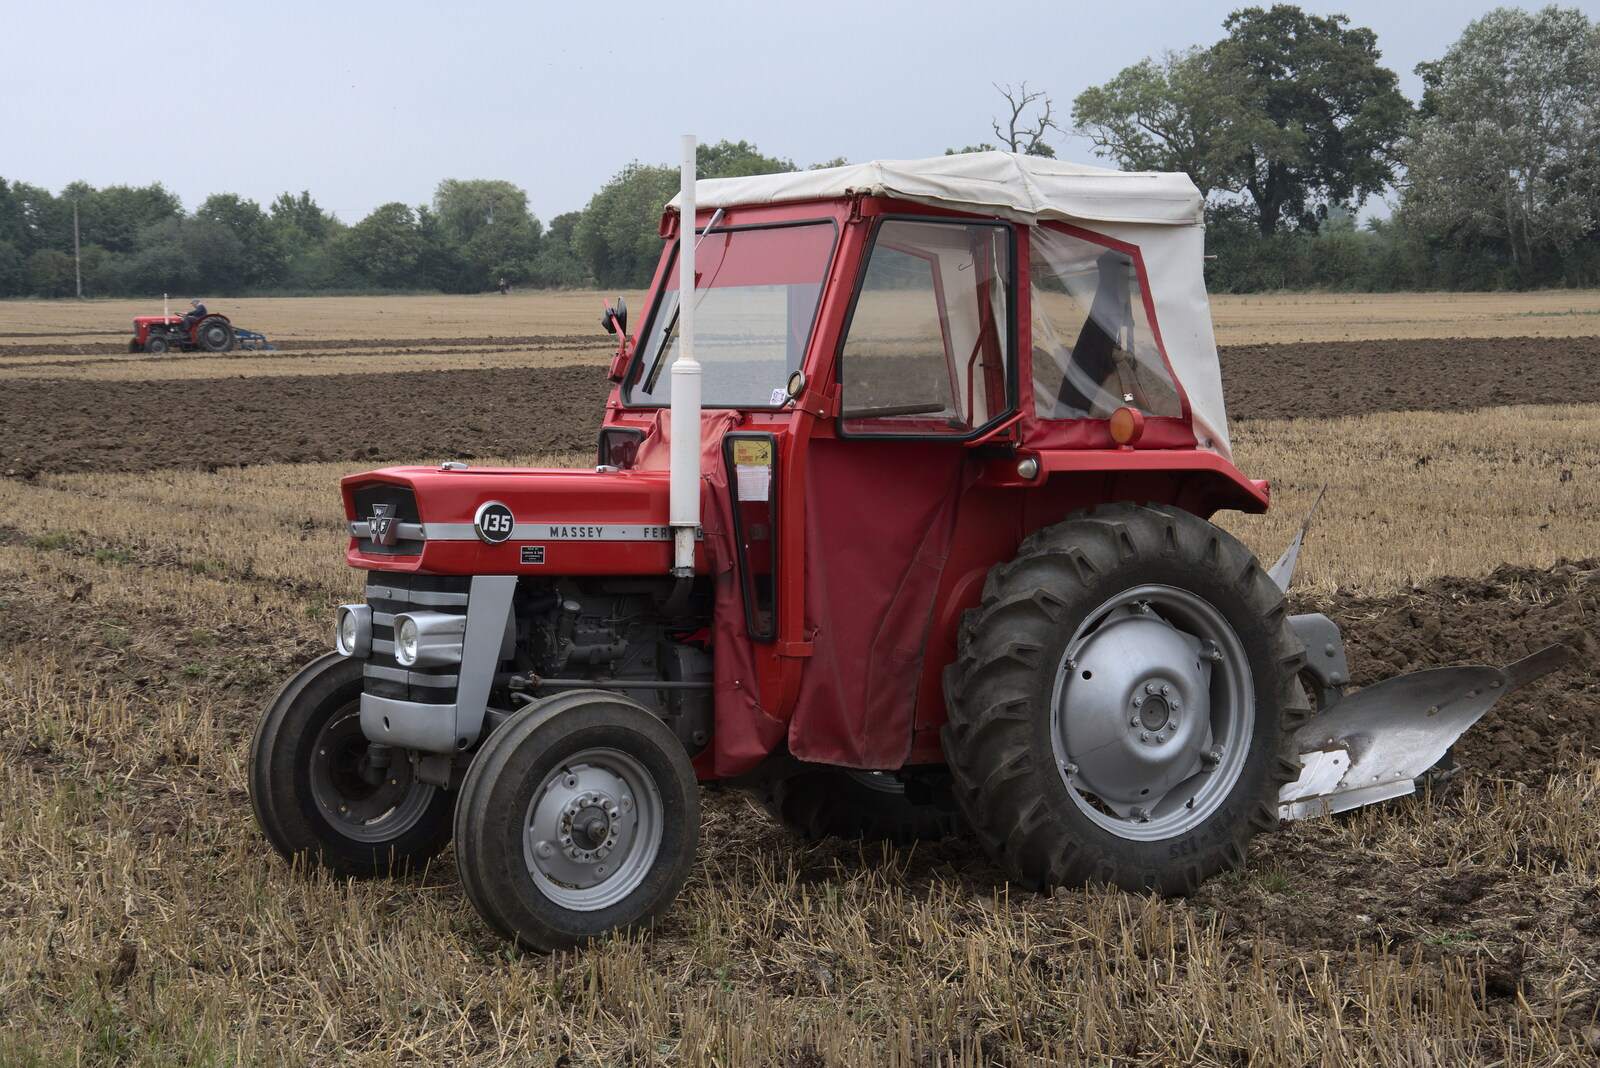 A Massey Ferguson 135 with a canvas cab from Vintage Tractor Ploughing, Thrandeston, Suffolk - 26th September 2021